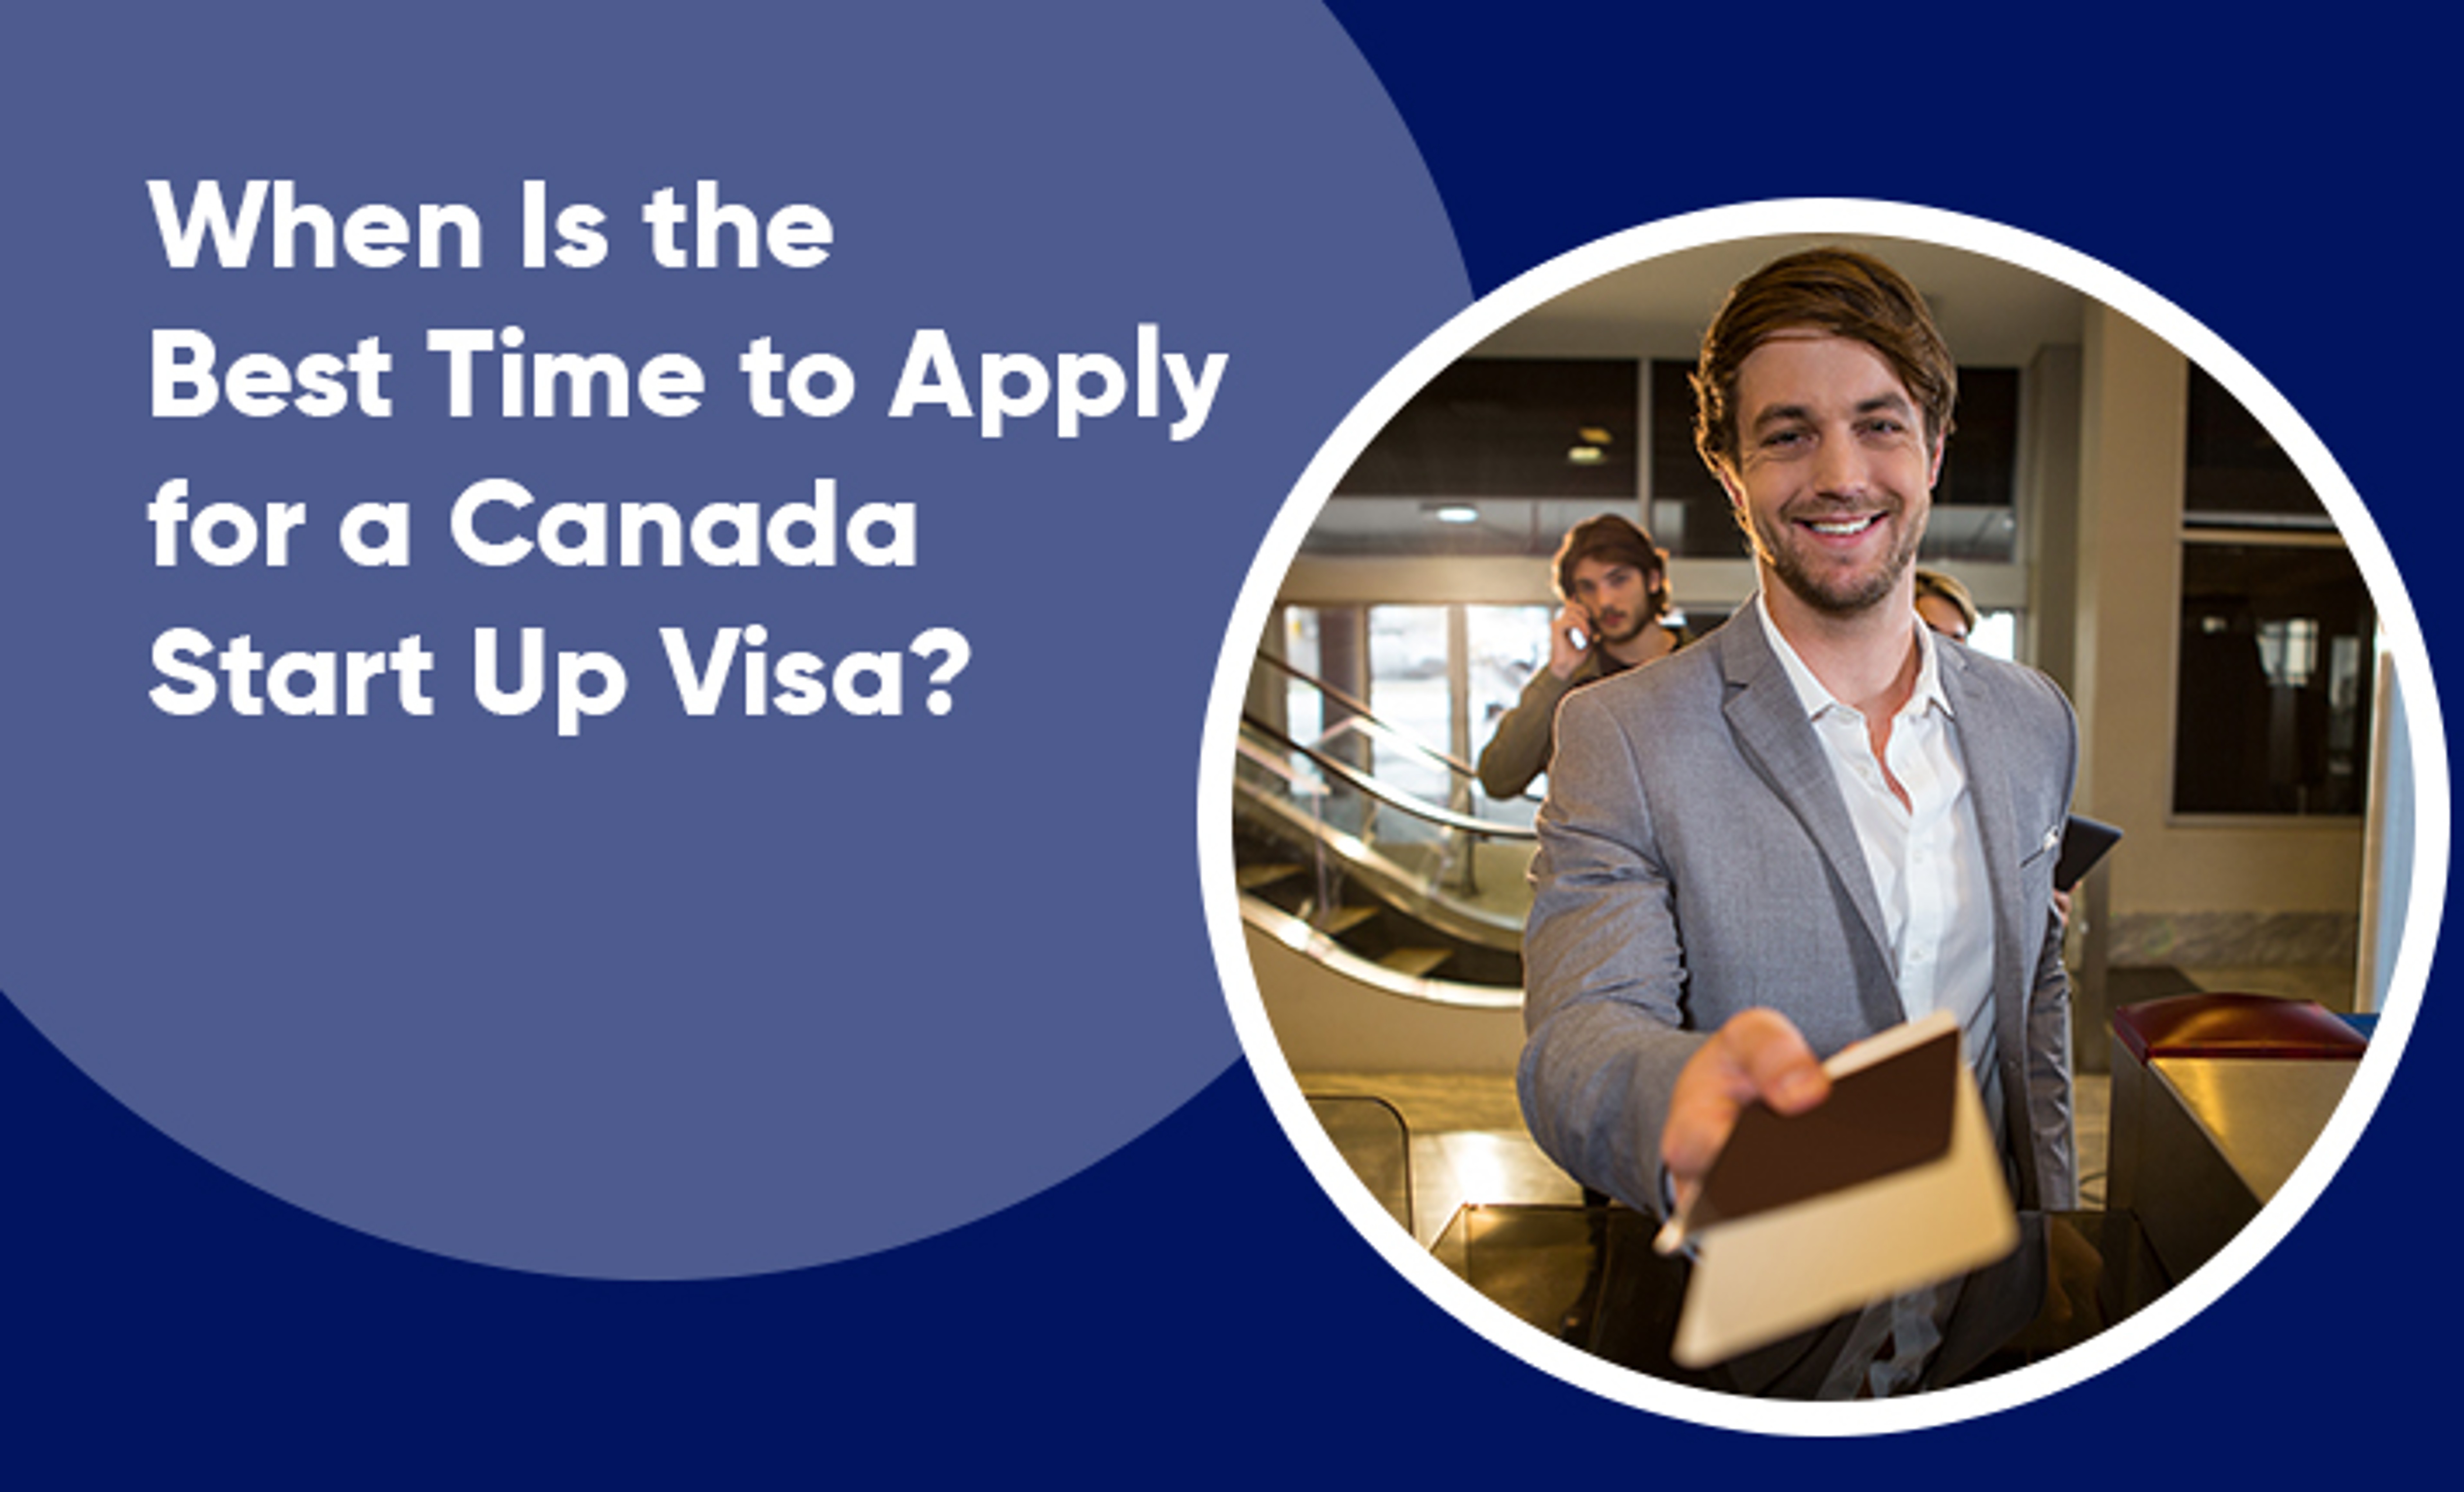 When Is the Best Time to Apply for a Canada Start-up Visa?